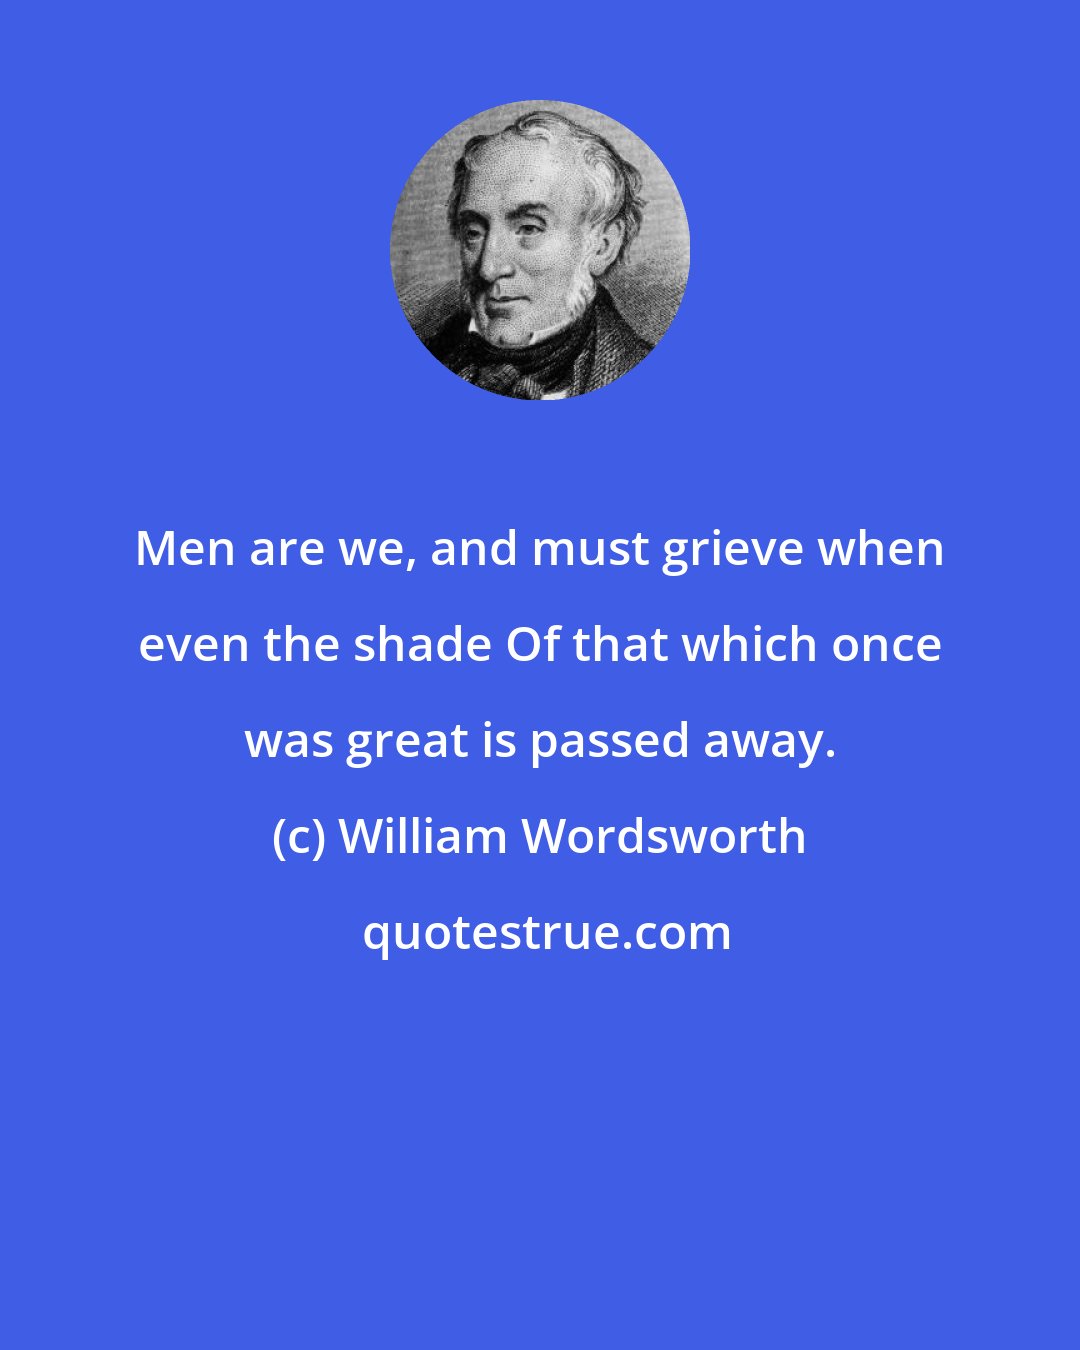 William Wordsworth: Men are we, and must grieve when even the shade Of that which once was great is passed away.